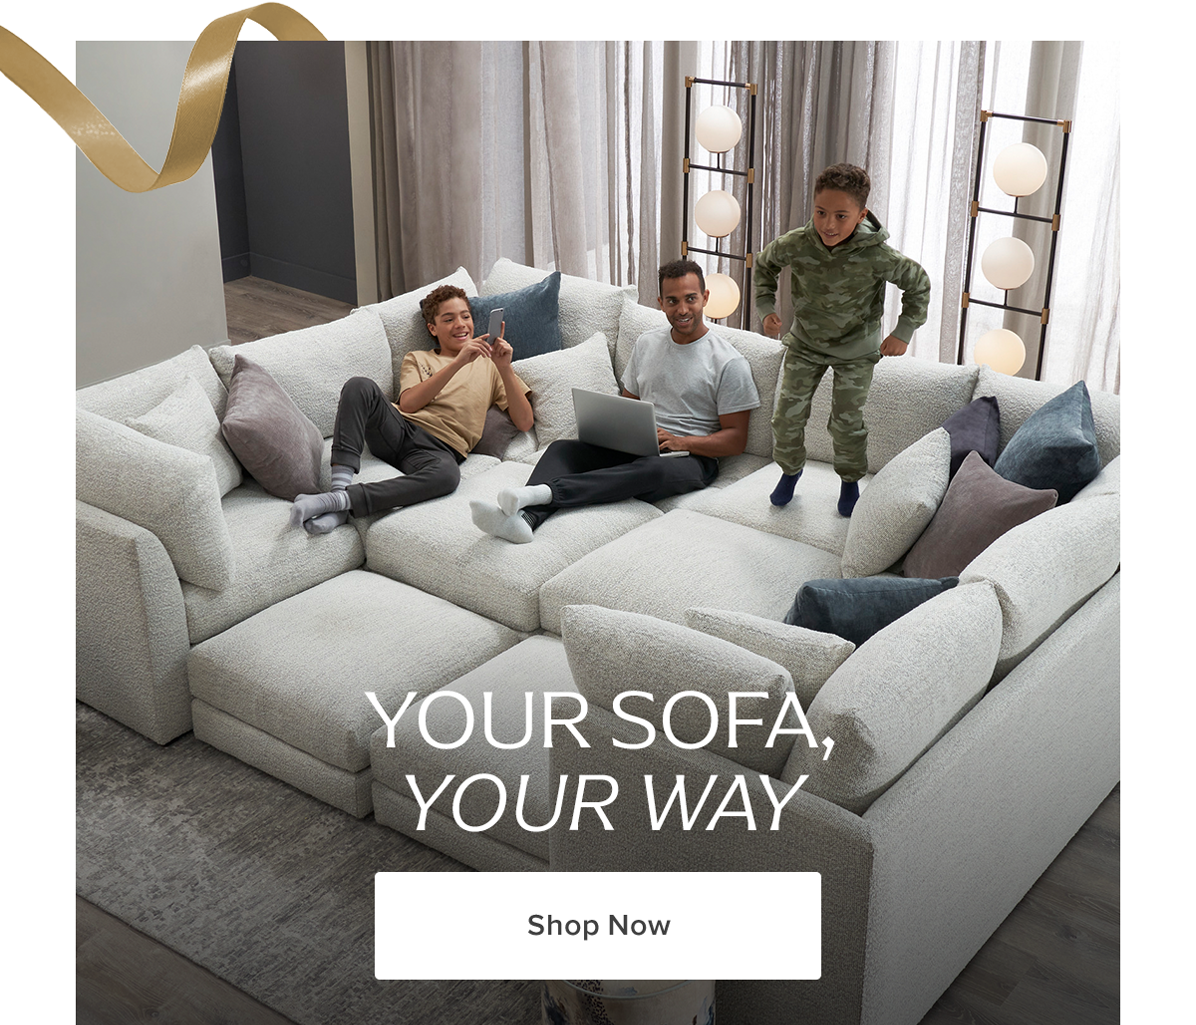 Your sofa, your way